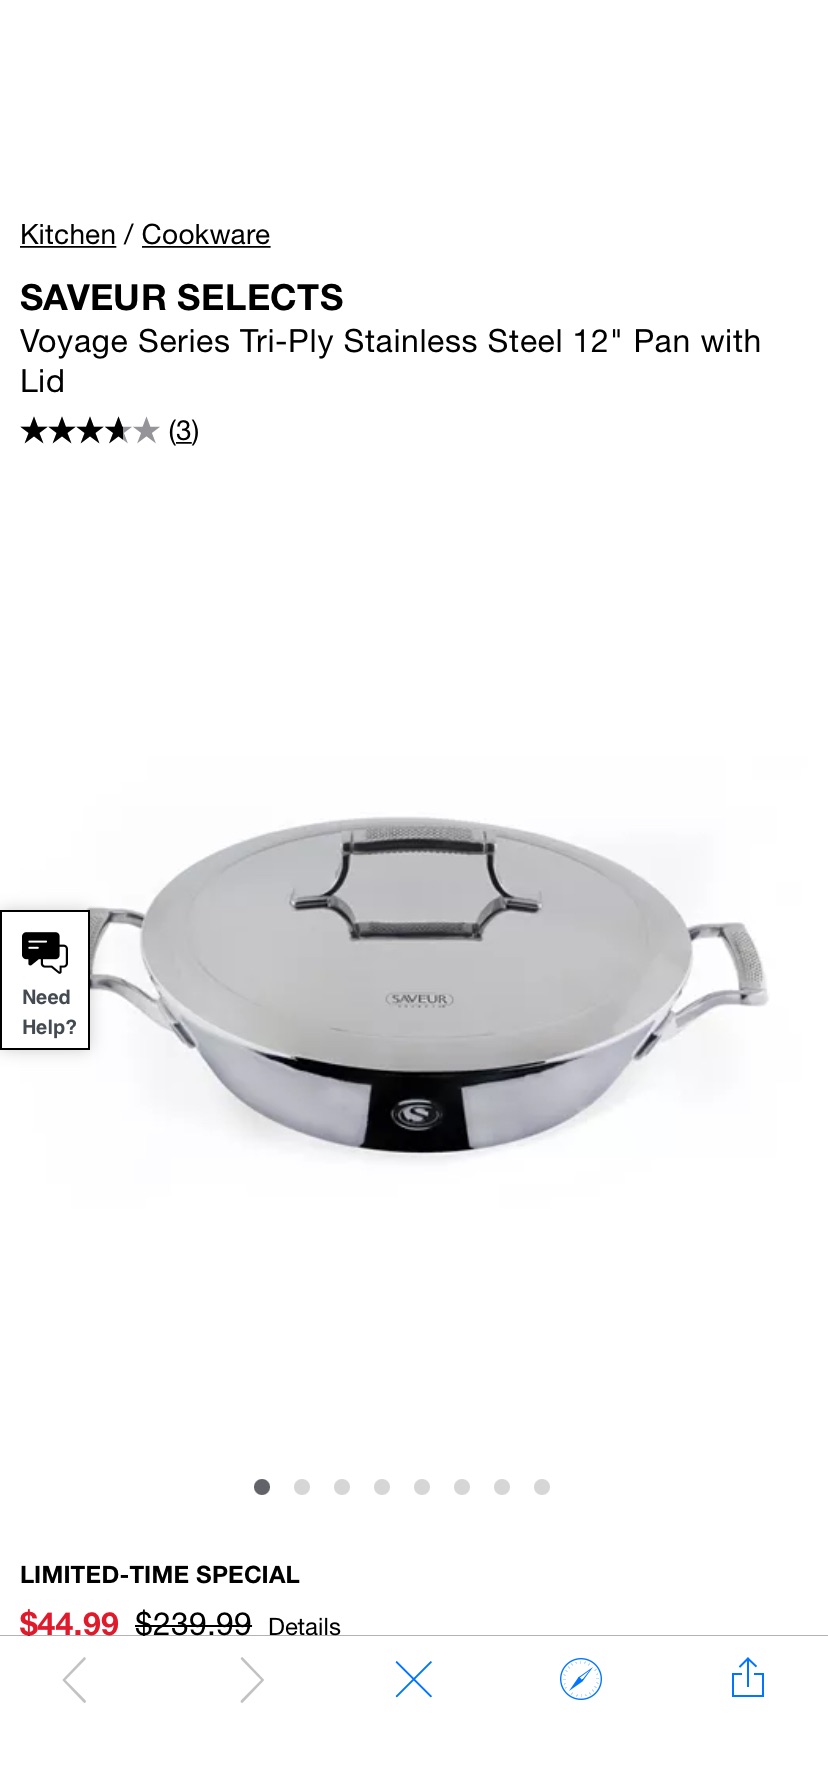 SAVEUR SELECTS Voyage Series Tri-Ply Stainless Steel 12" Pan with Lid & Reviews - Cookware - Kitchen - Macy's锅